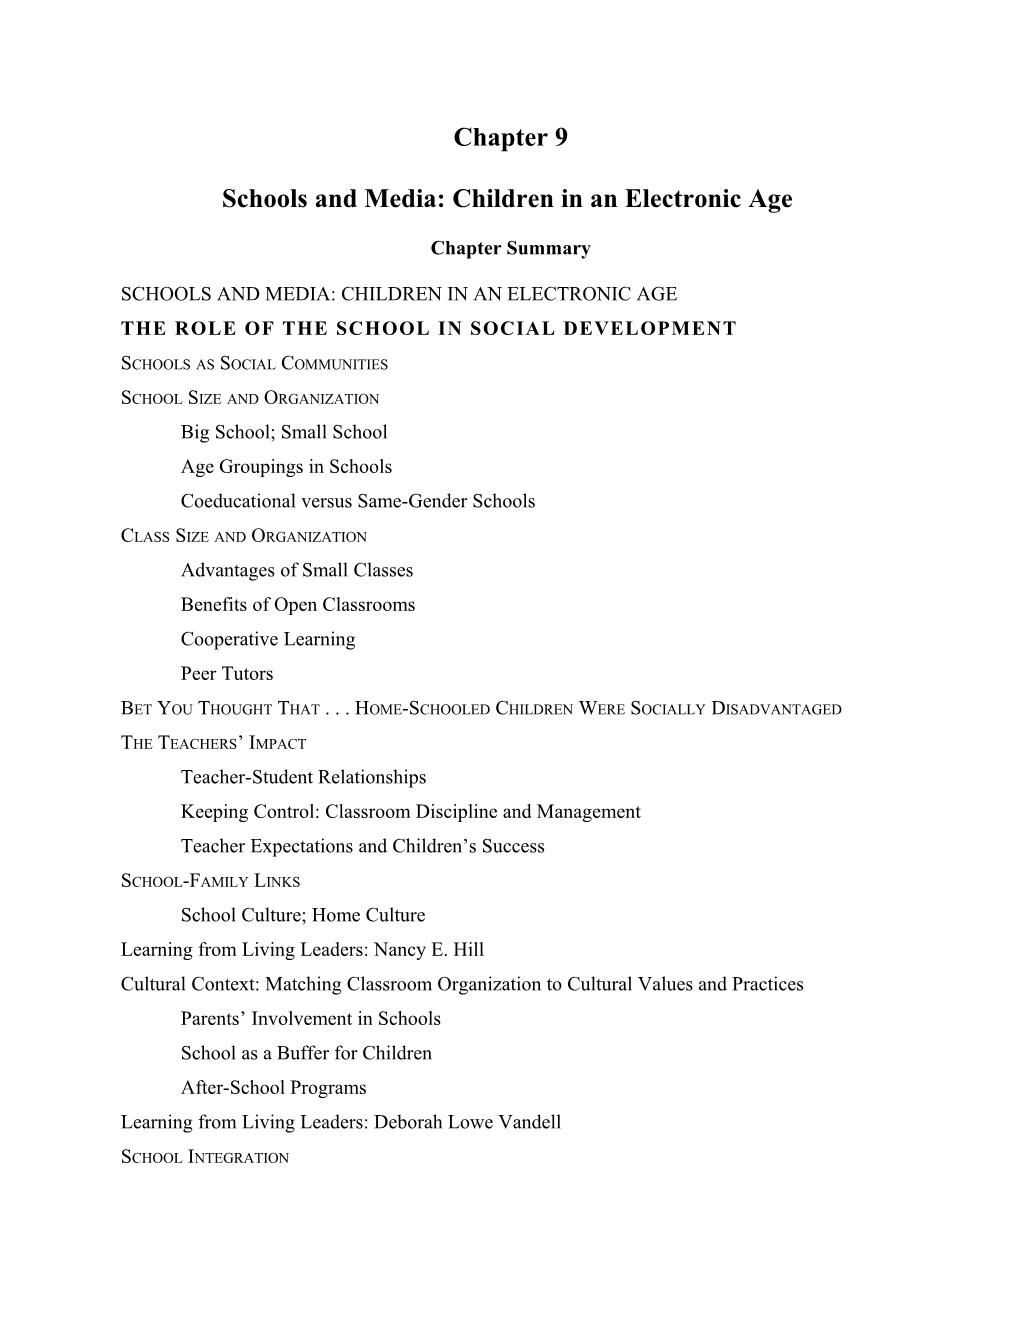 Schools and Media: Children in an Electronic Age